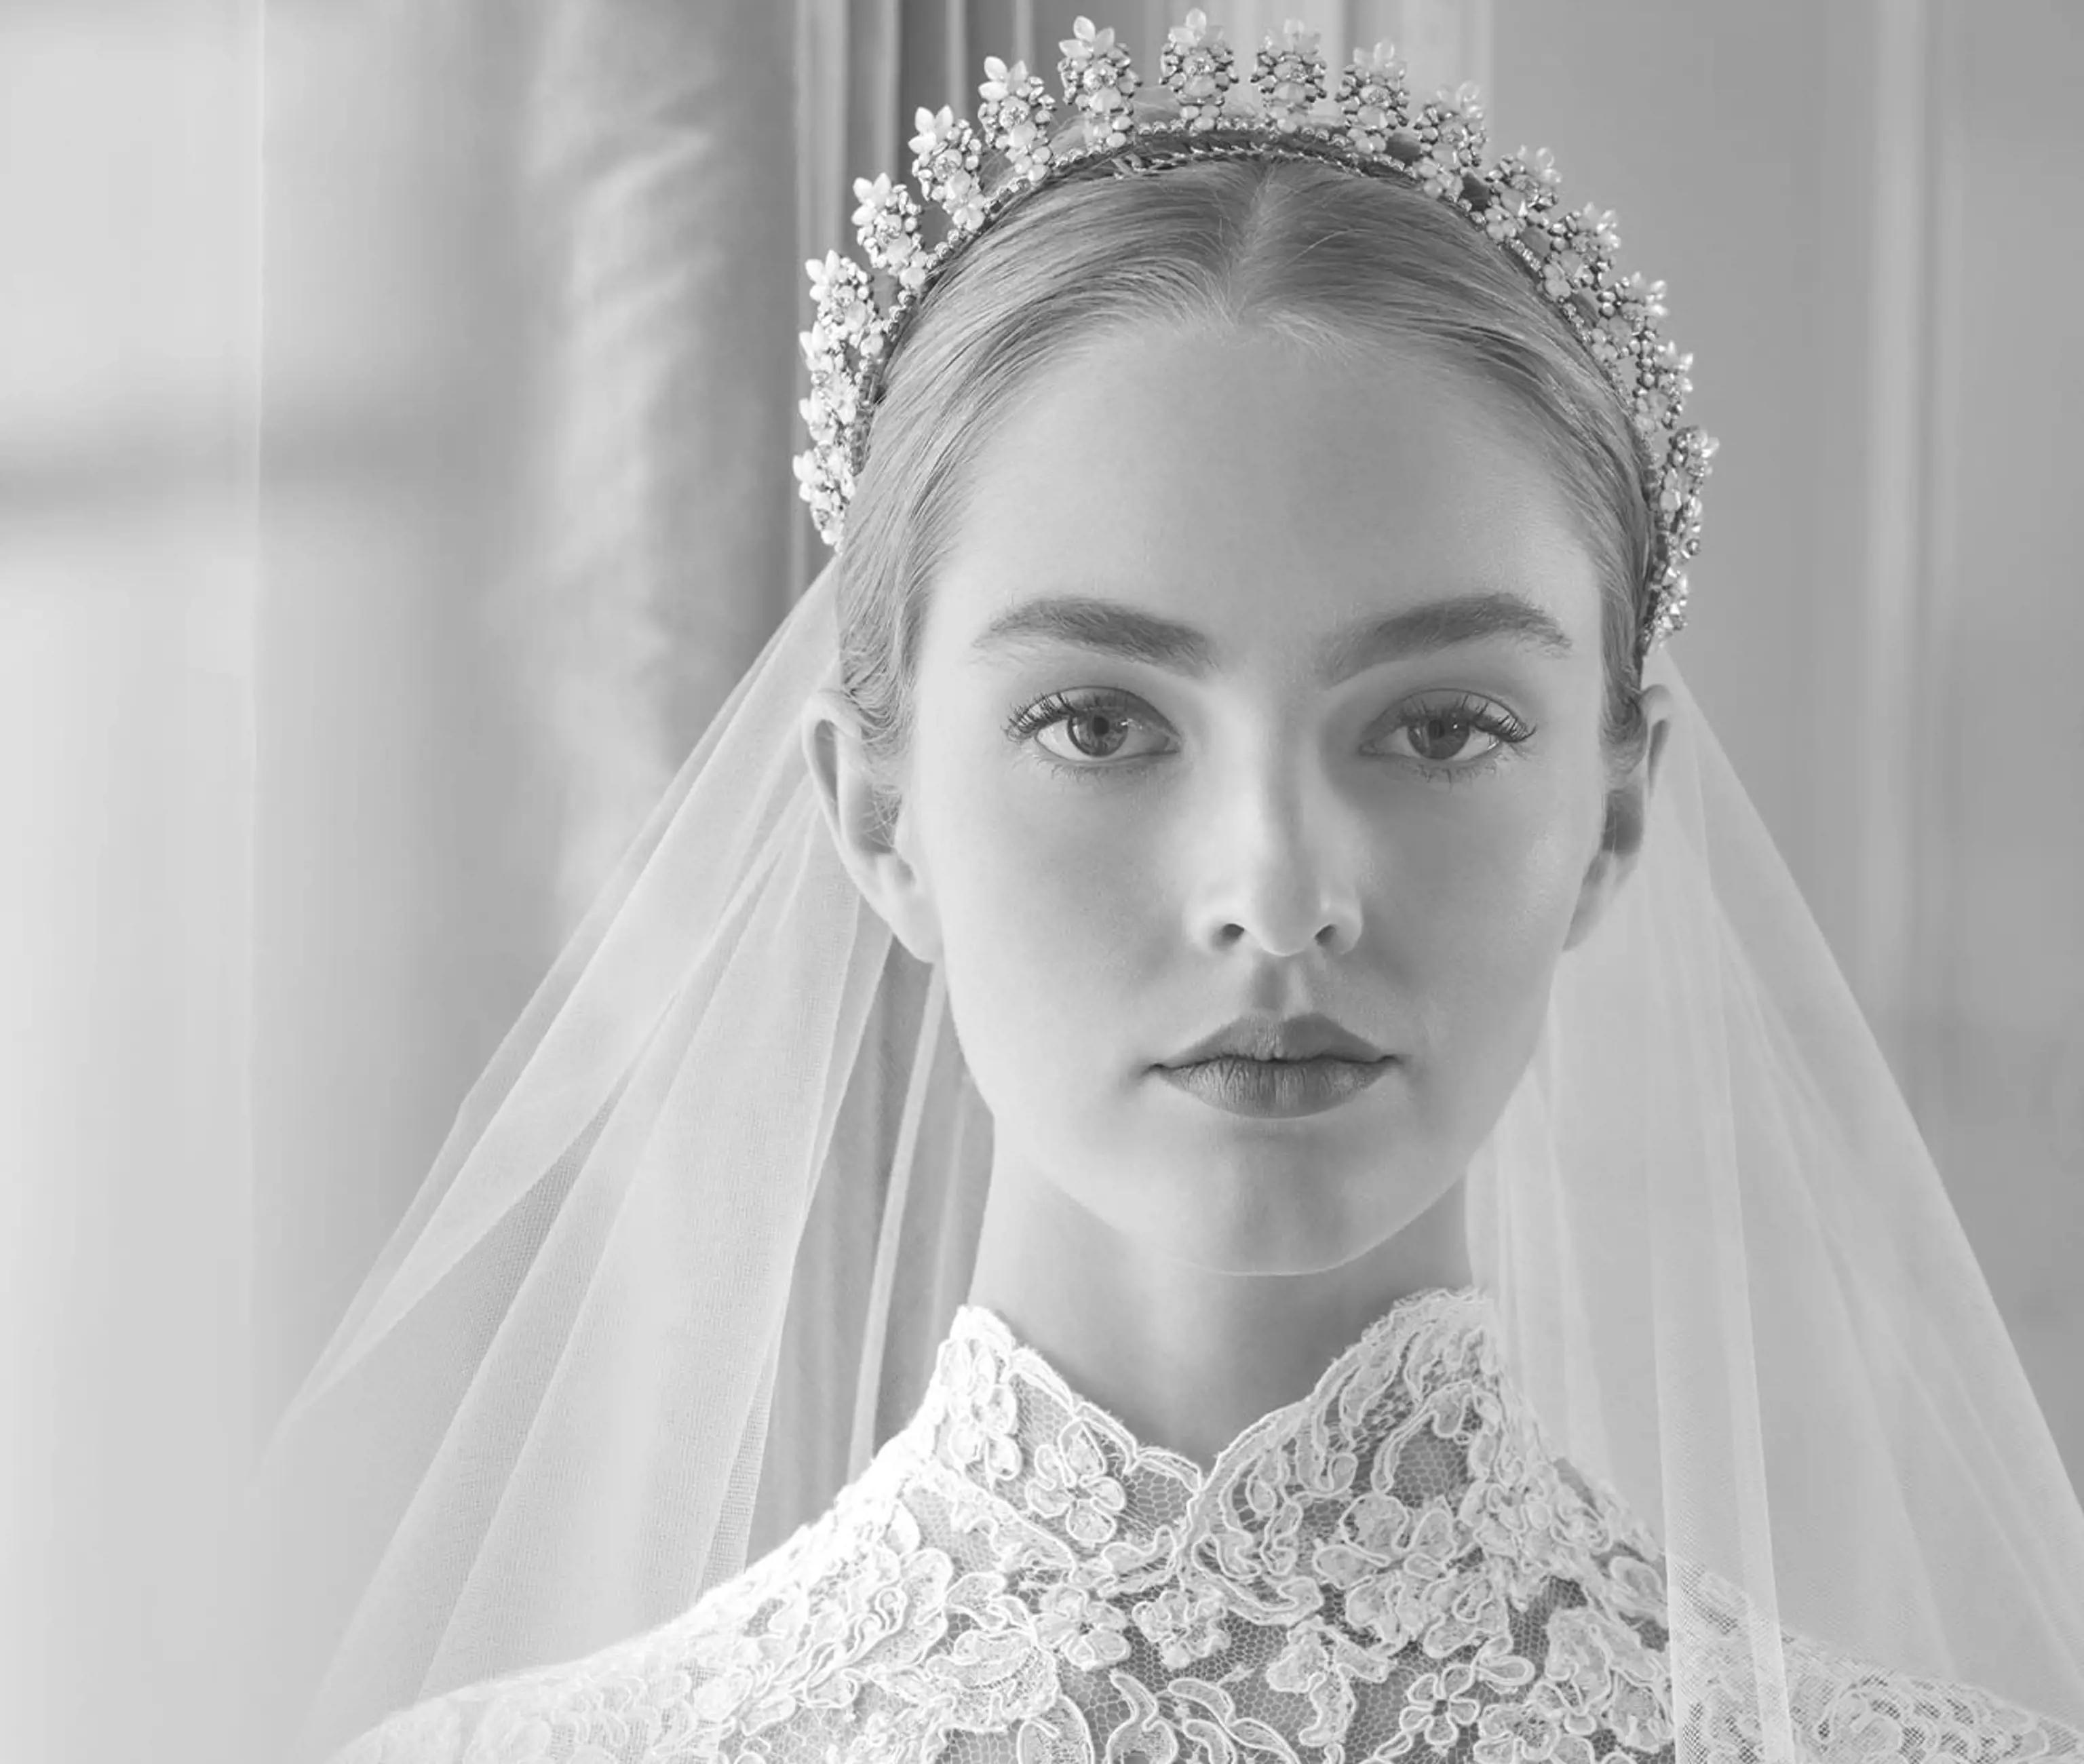 Model wearing a bridal gown grayscale